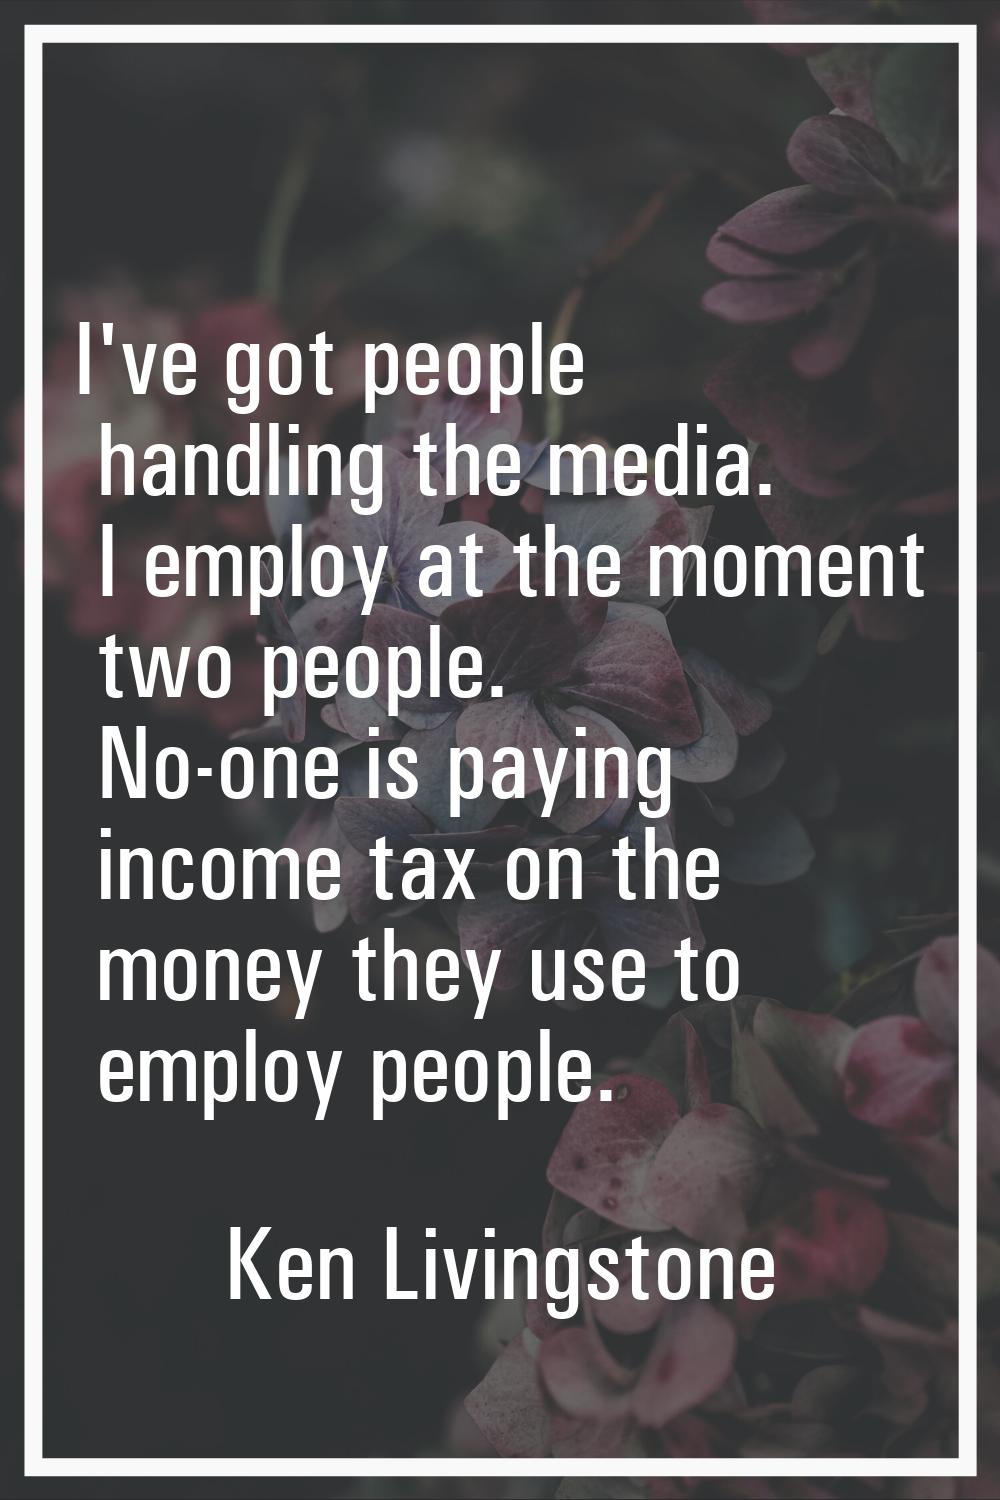 I've got people handling the media. I employ at the moment two people. No-one is paying income tax 